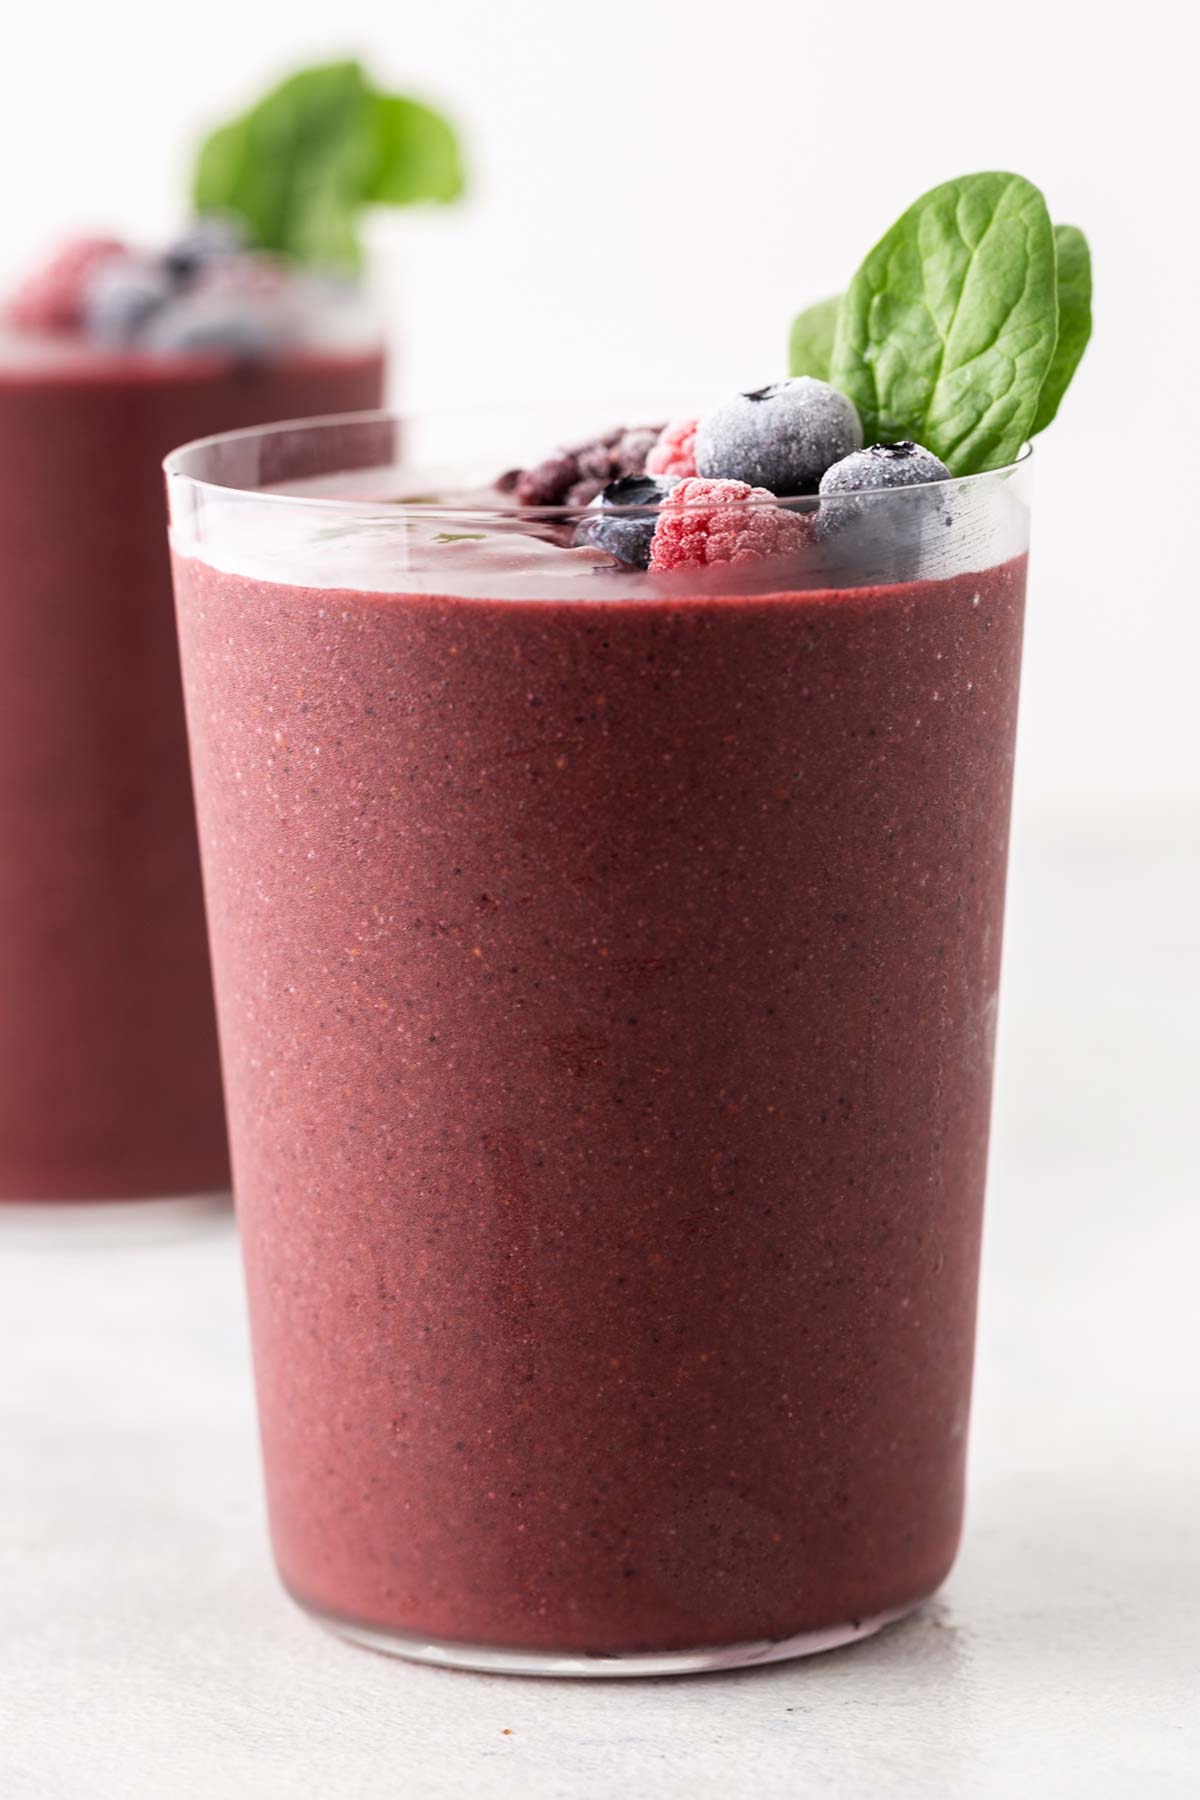 Berry smoothie in a glass.